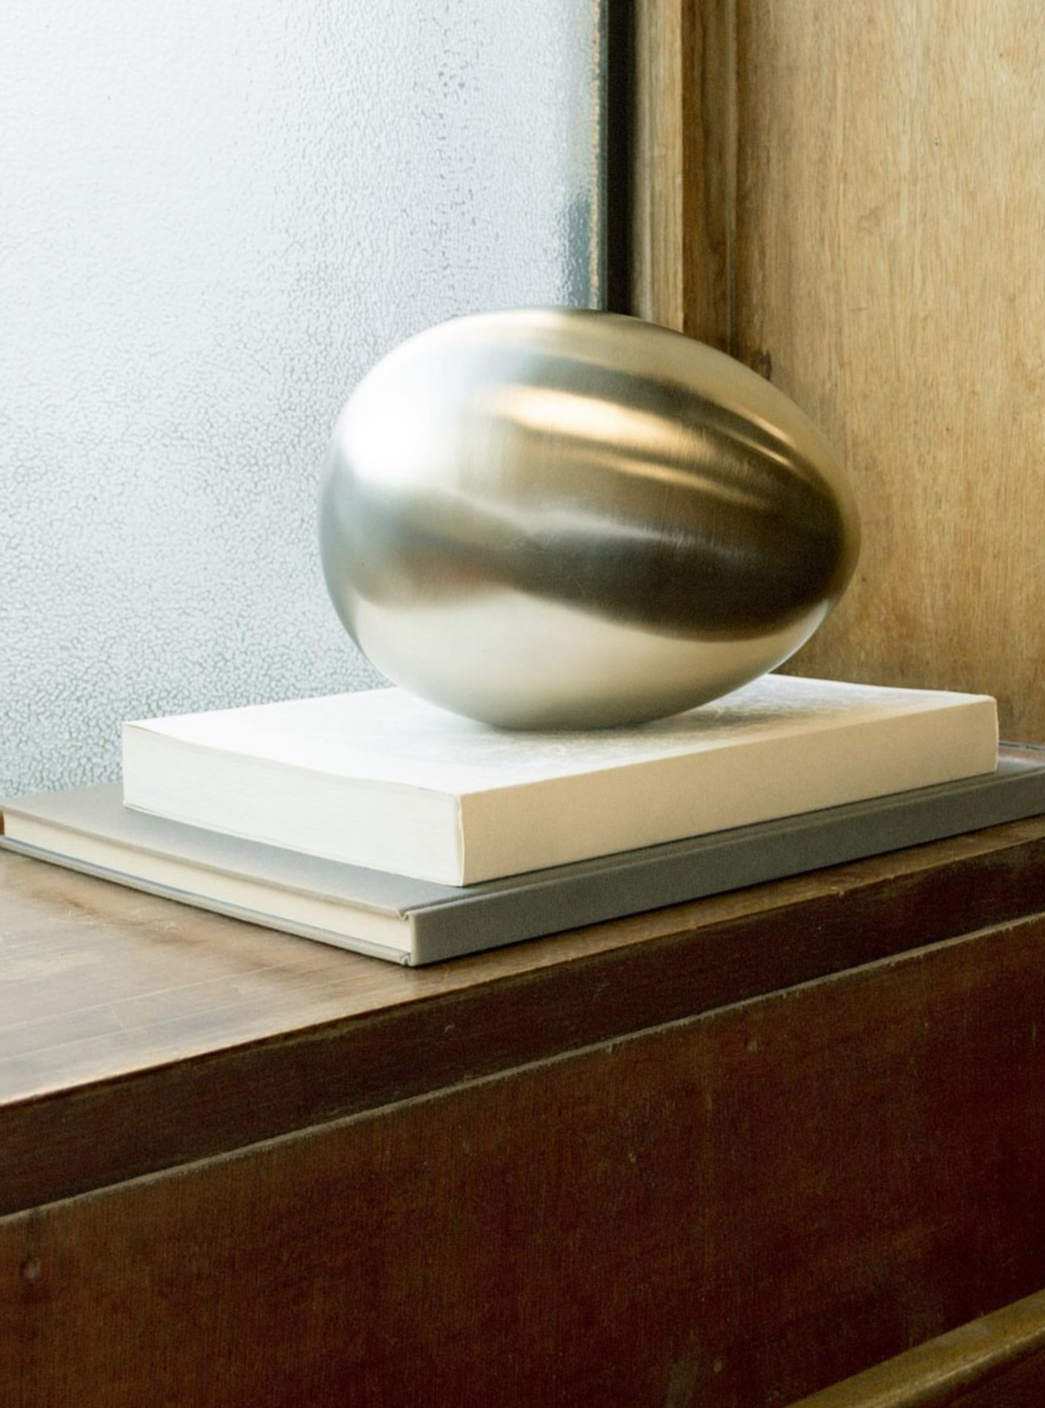 Brushed Steel Egg Sculpture with Abstract Design and Smooth Texture